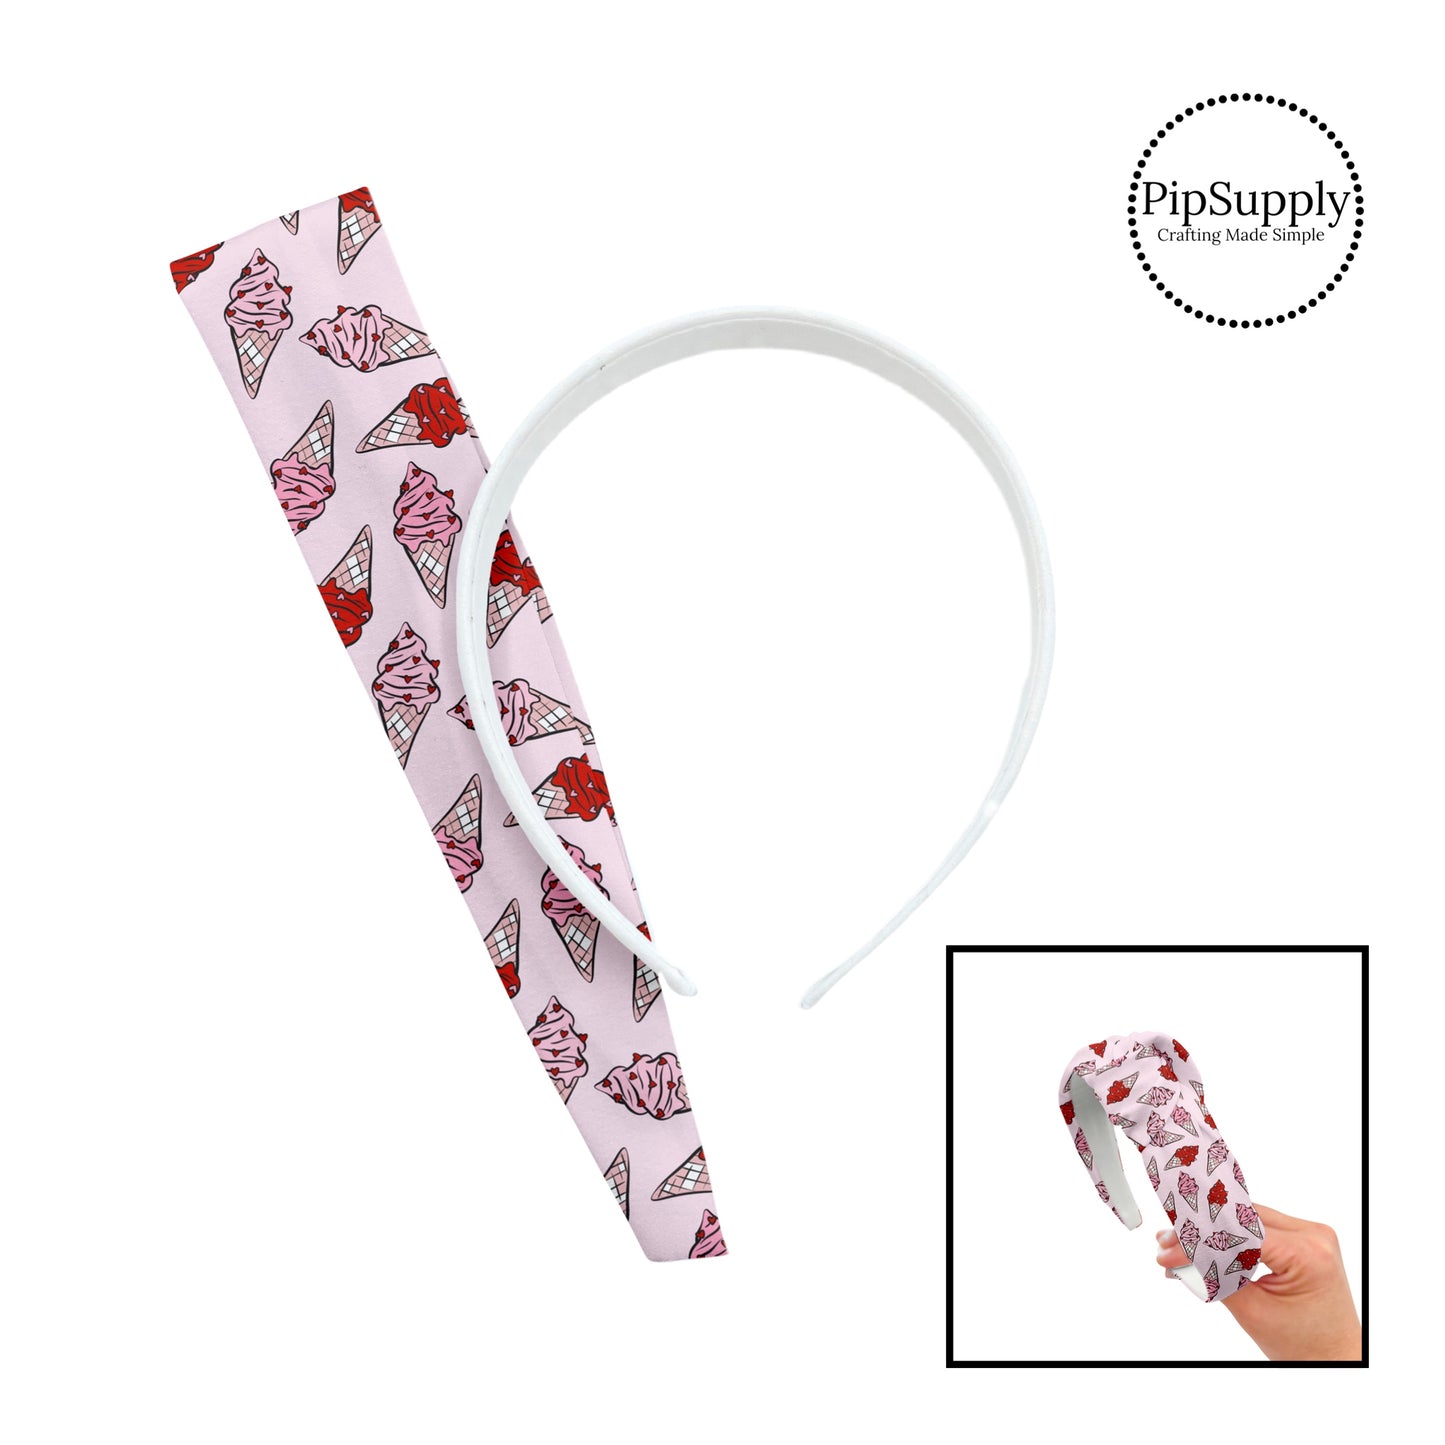 Pink and red ice cream on cones on pink knotted headband kit